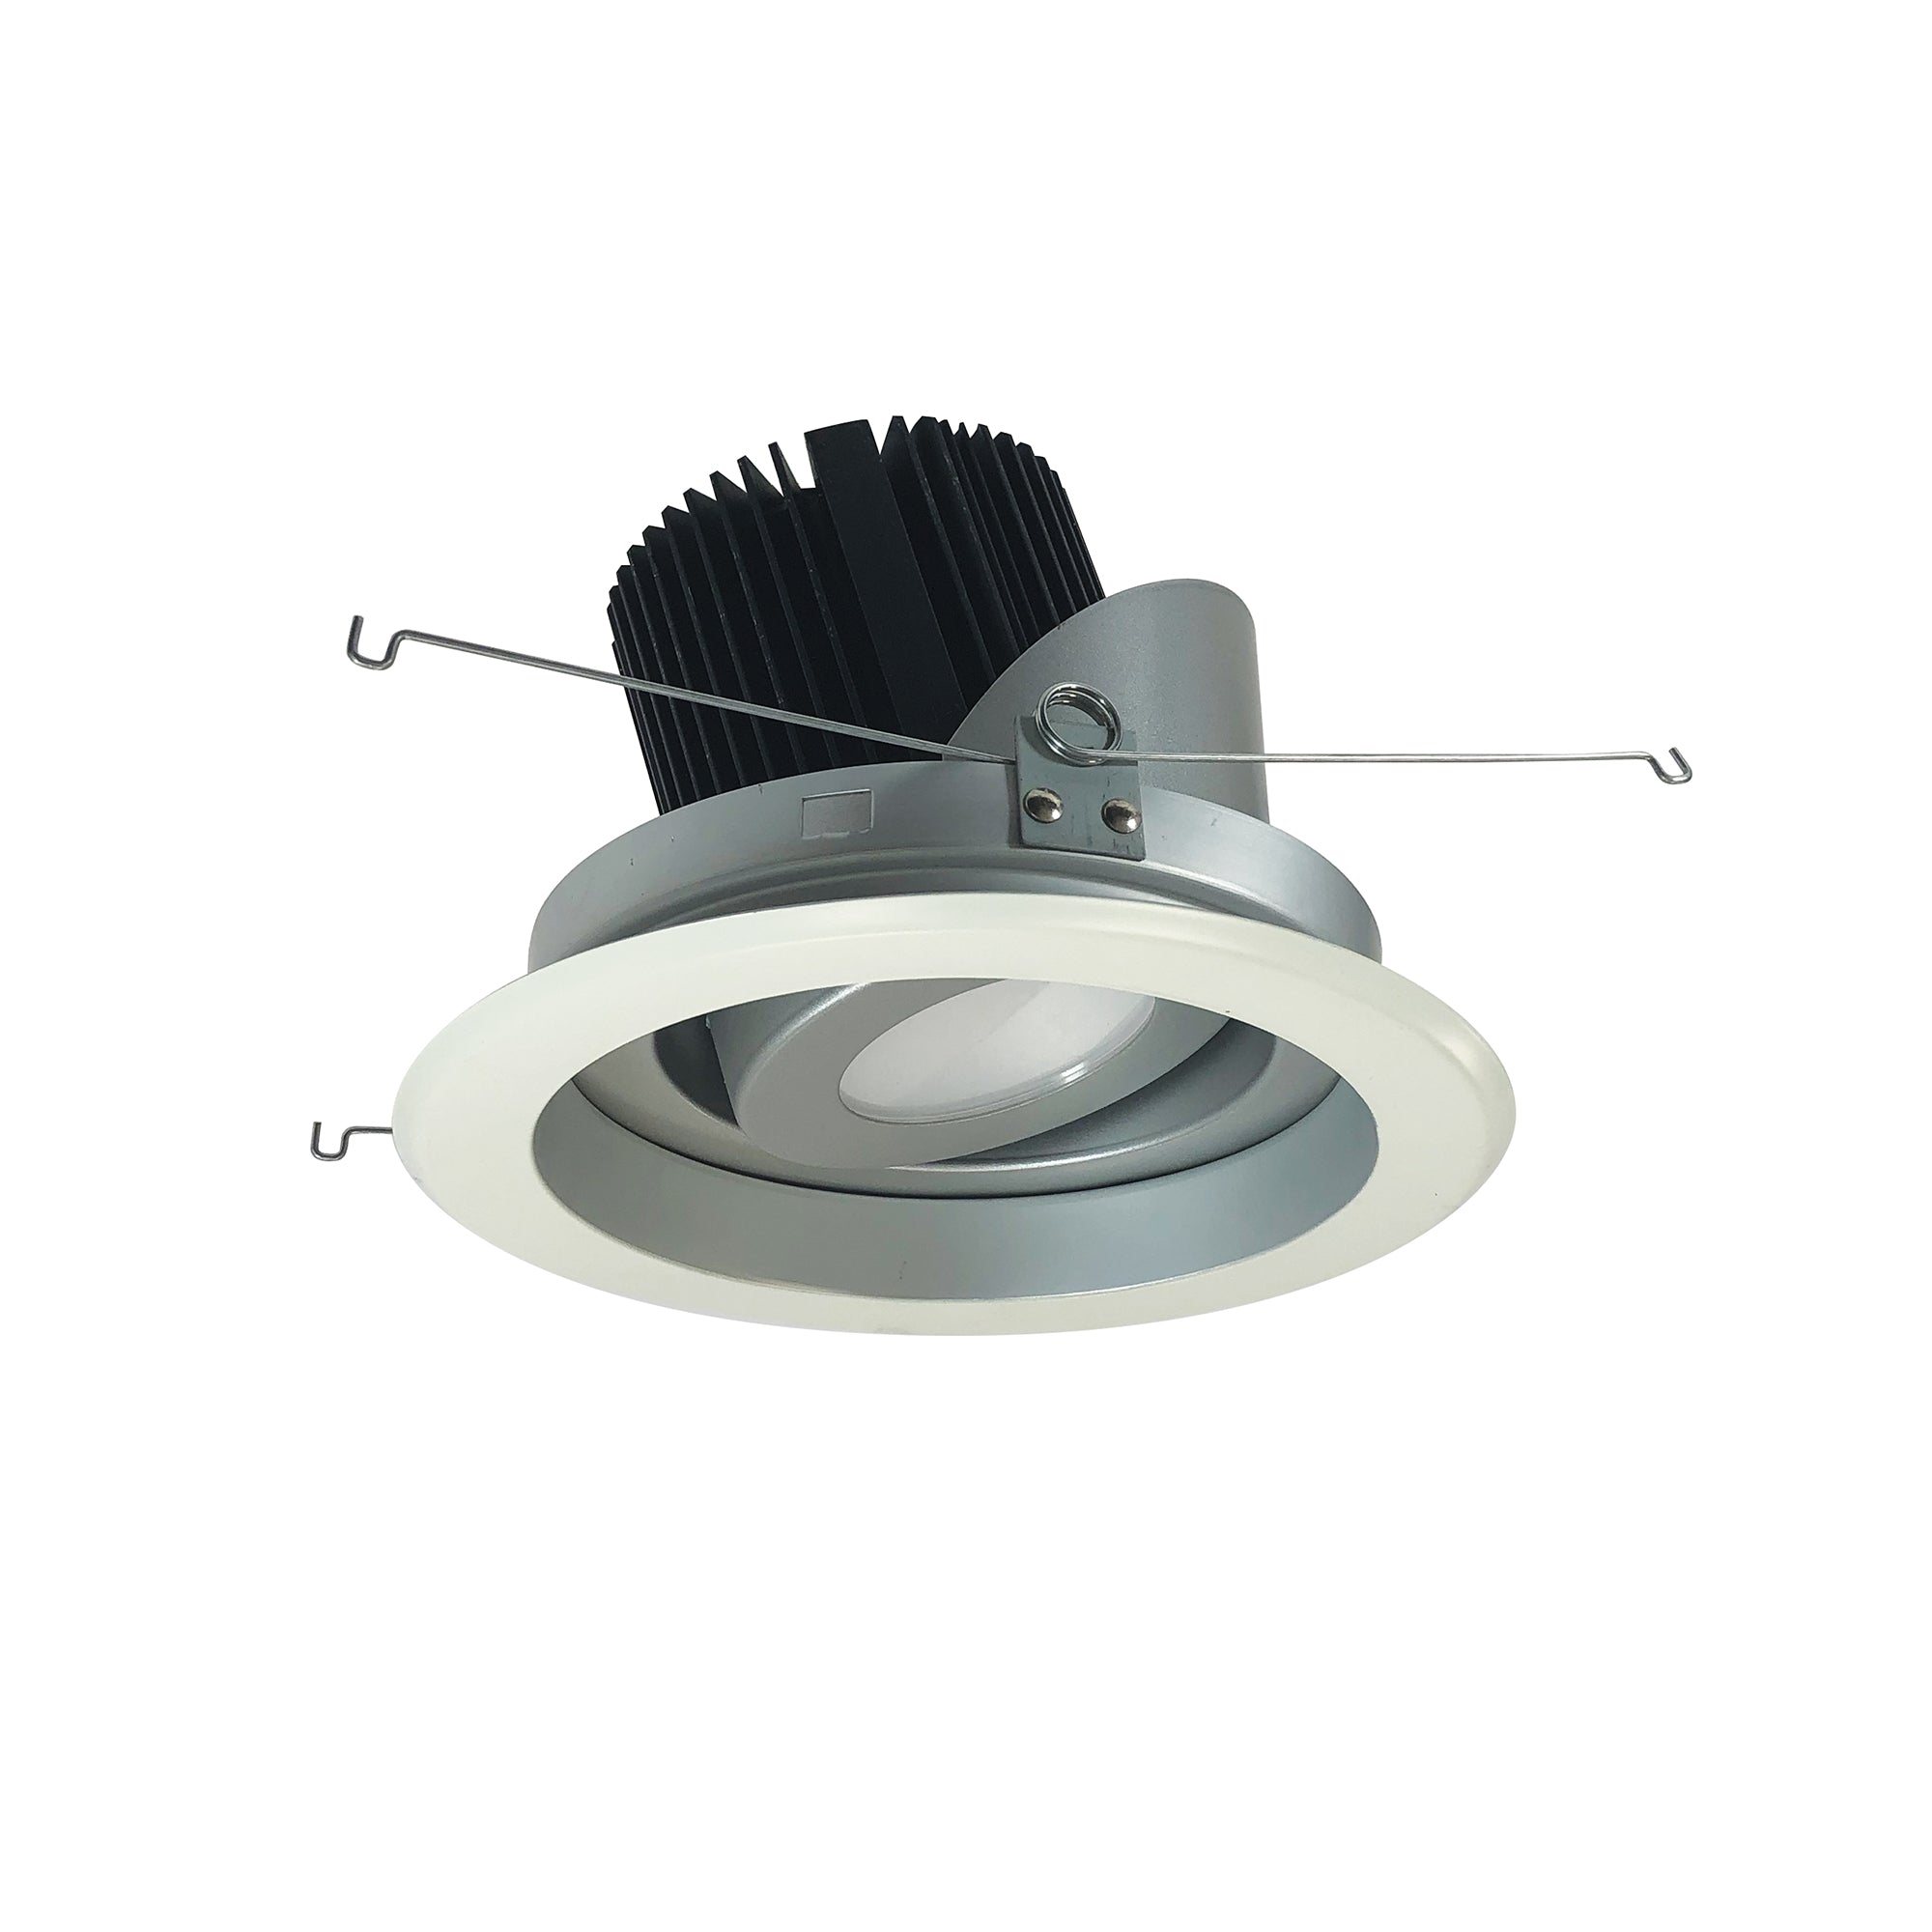 Nora Lighting NRM2-619L2530FHZW - Recessed - 6 Inch Marquise II Round Regressed Adj. Reflector, Flood, 2500lm, 3000K, Haze/White (Not Compatible with NHRM2-625 Housings)